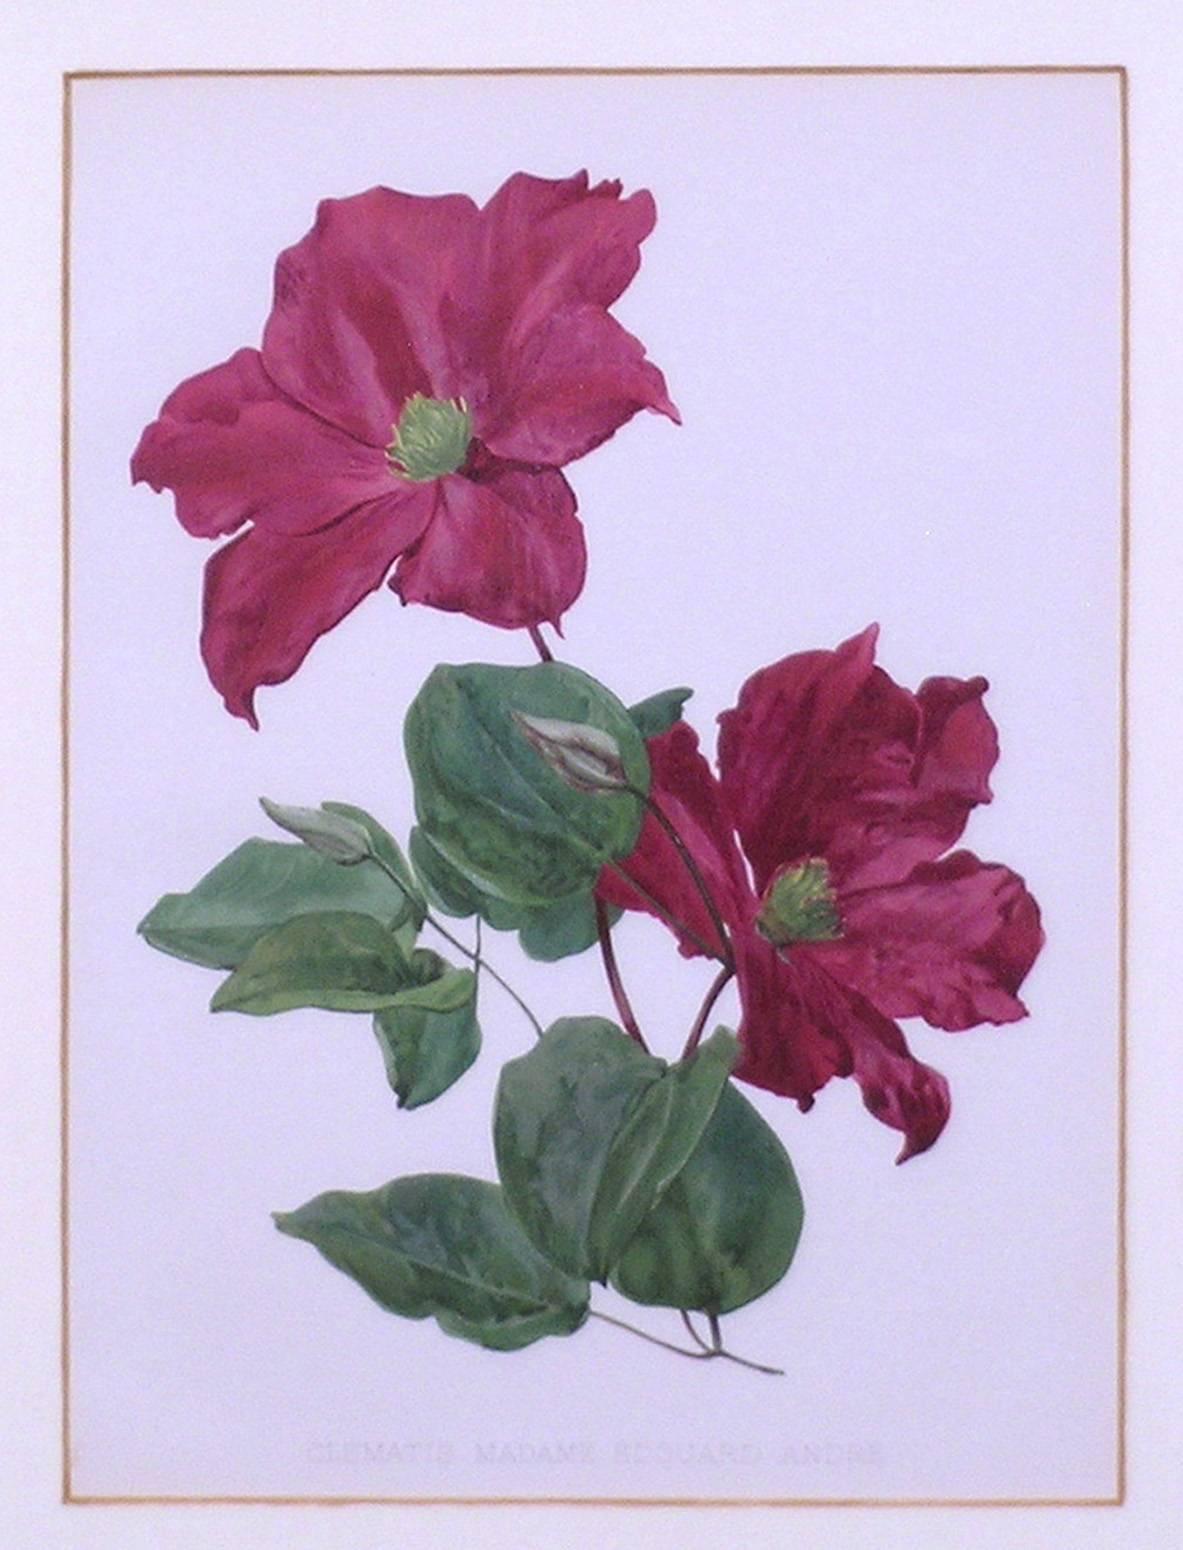 Clematis - Print by Henry George Moon